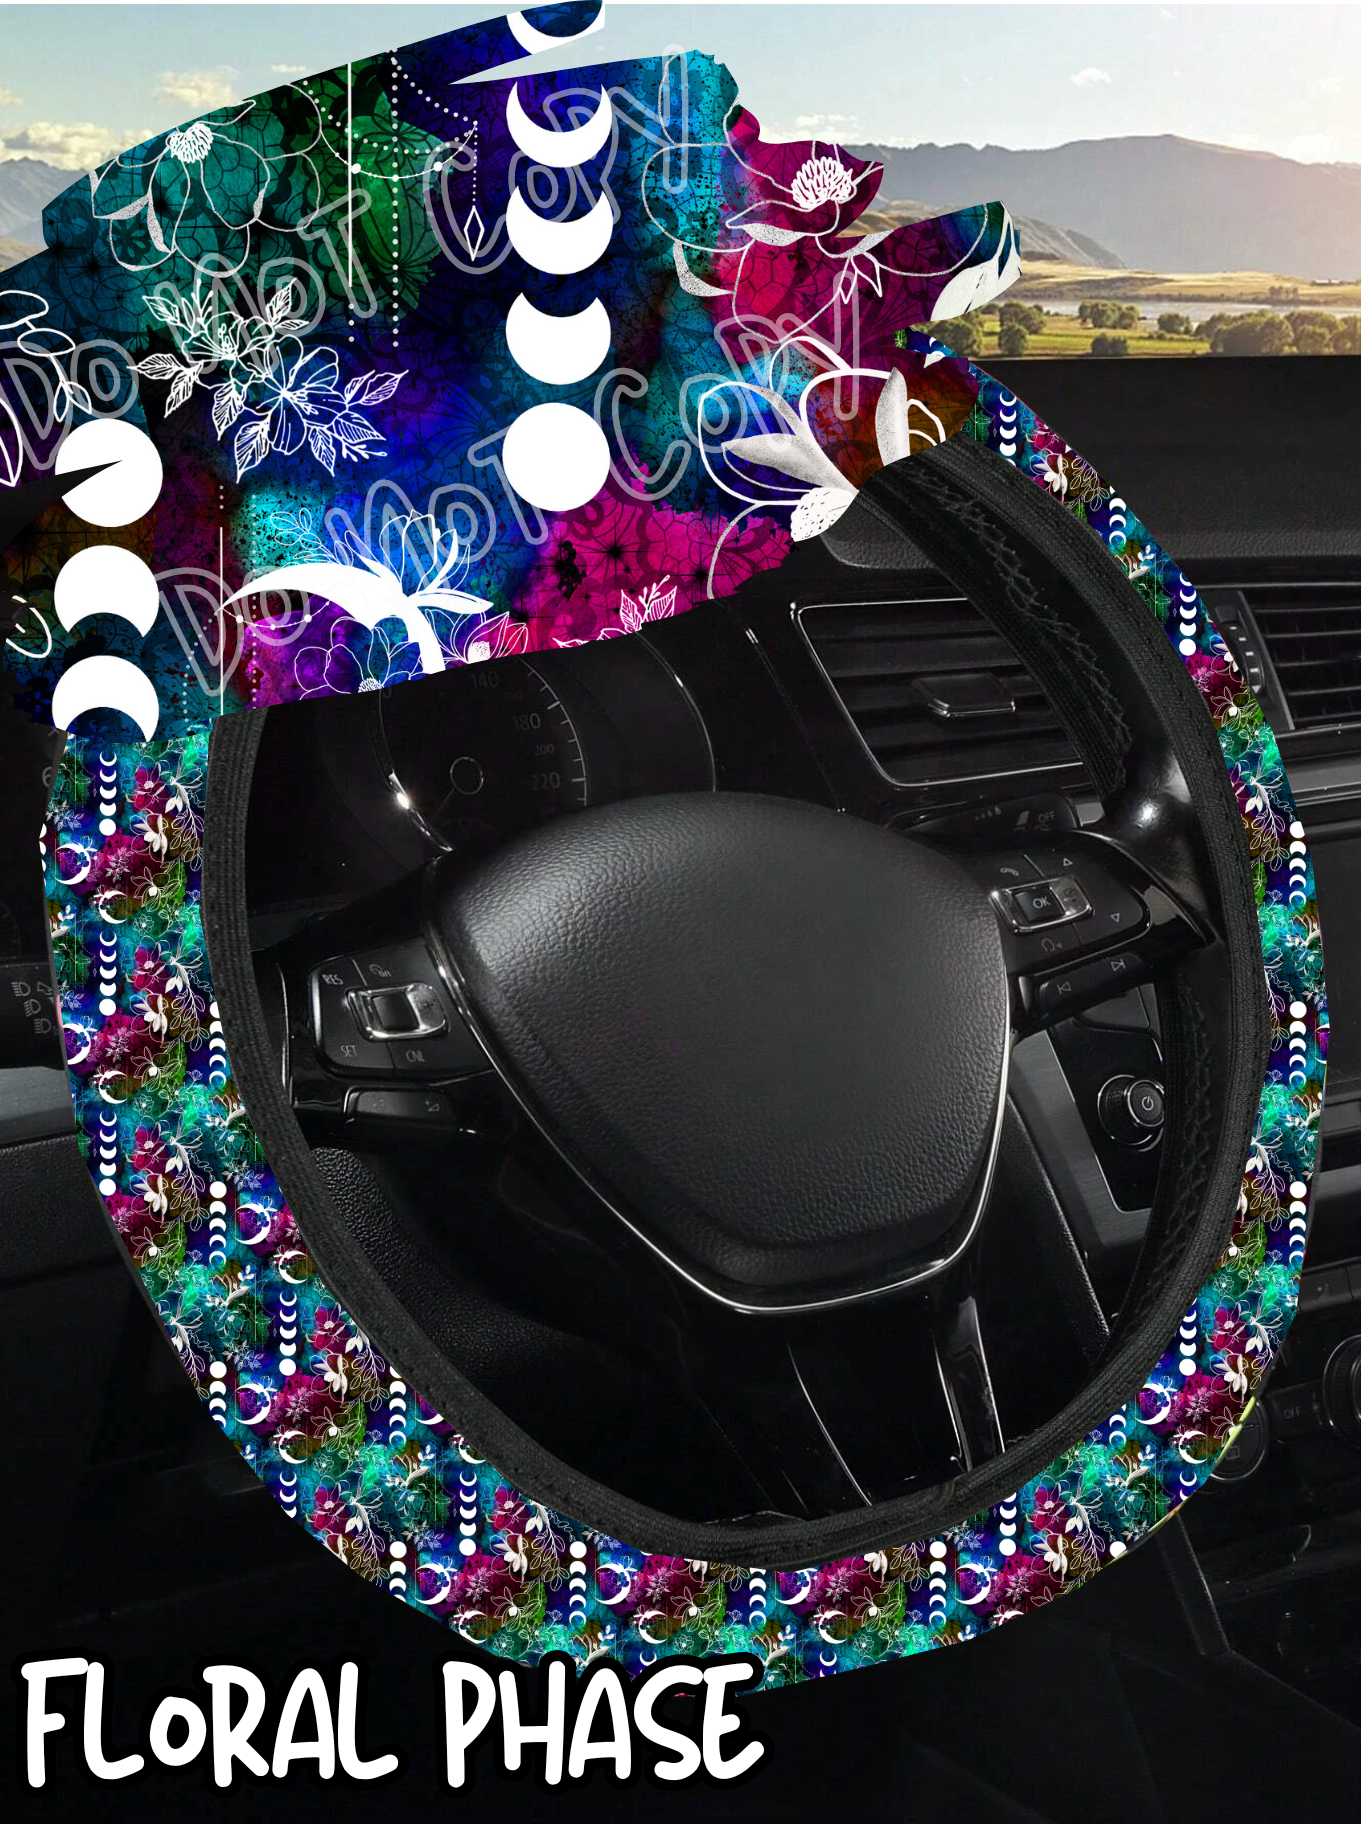 Floral Phase - Steering Wheel Cover Preorder Round 3 Closing 10/25 ETA Early Dec